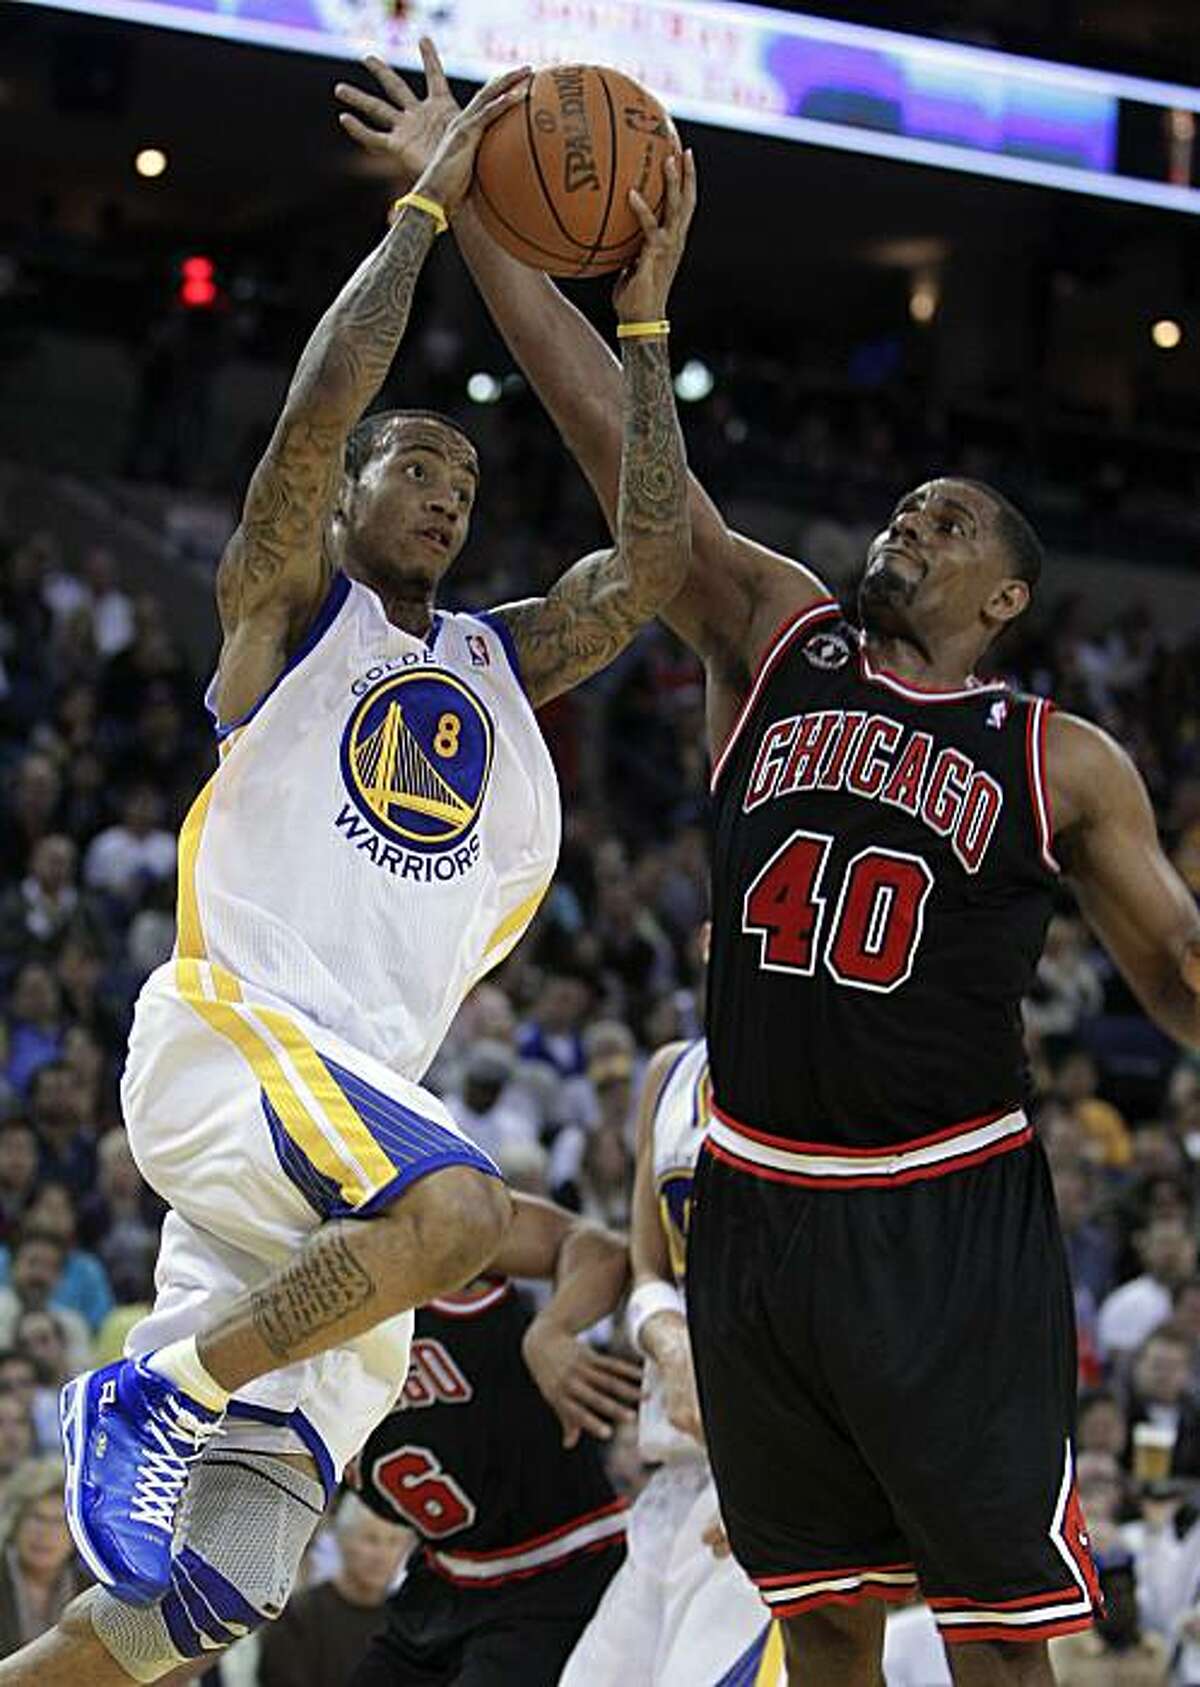 Golden State Warriors' Monta Ellis, left, goes up for a shot against Chicago Bulls' Kurt Thomas during the second half of an NBA basketball game Saturday, Feb. 5, 2011, in Oakland, Calif.